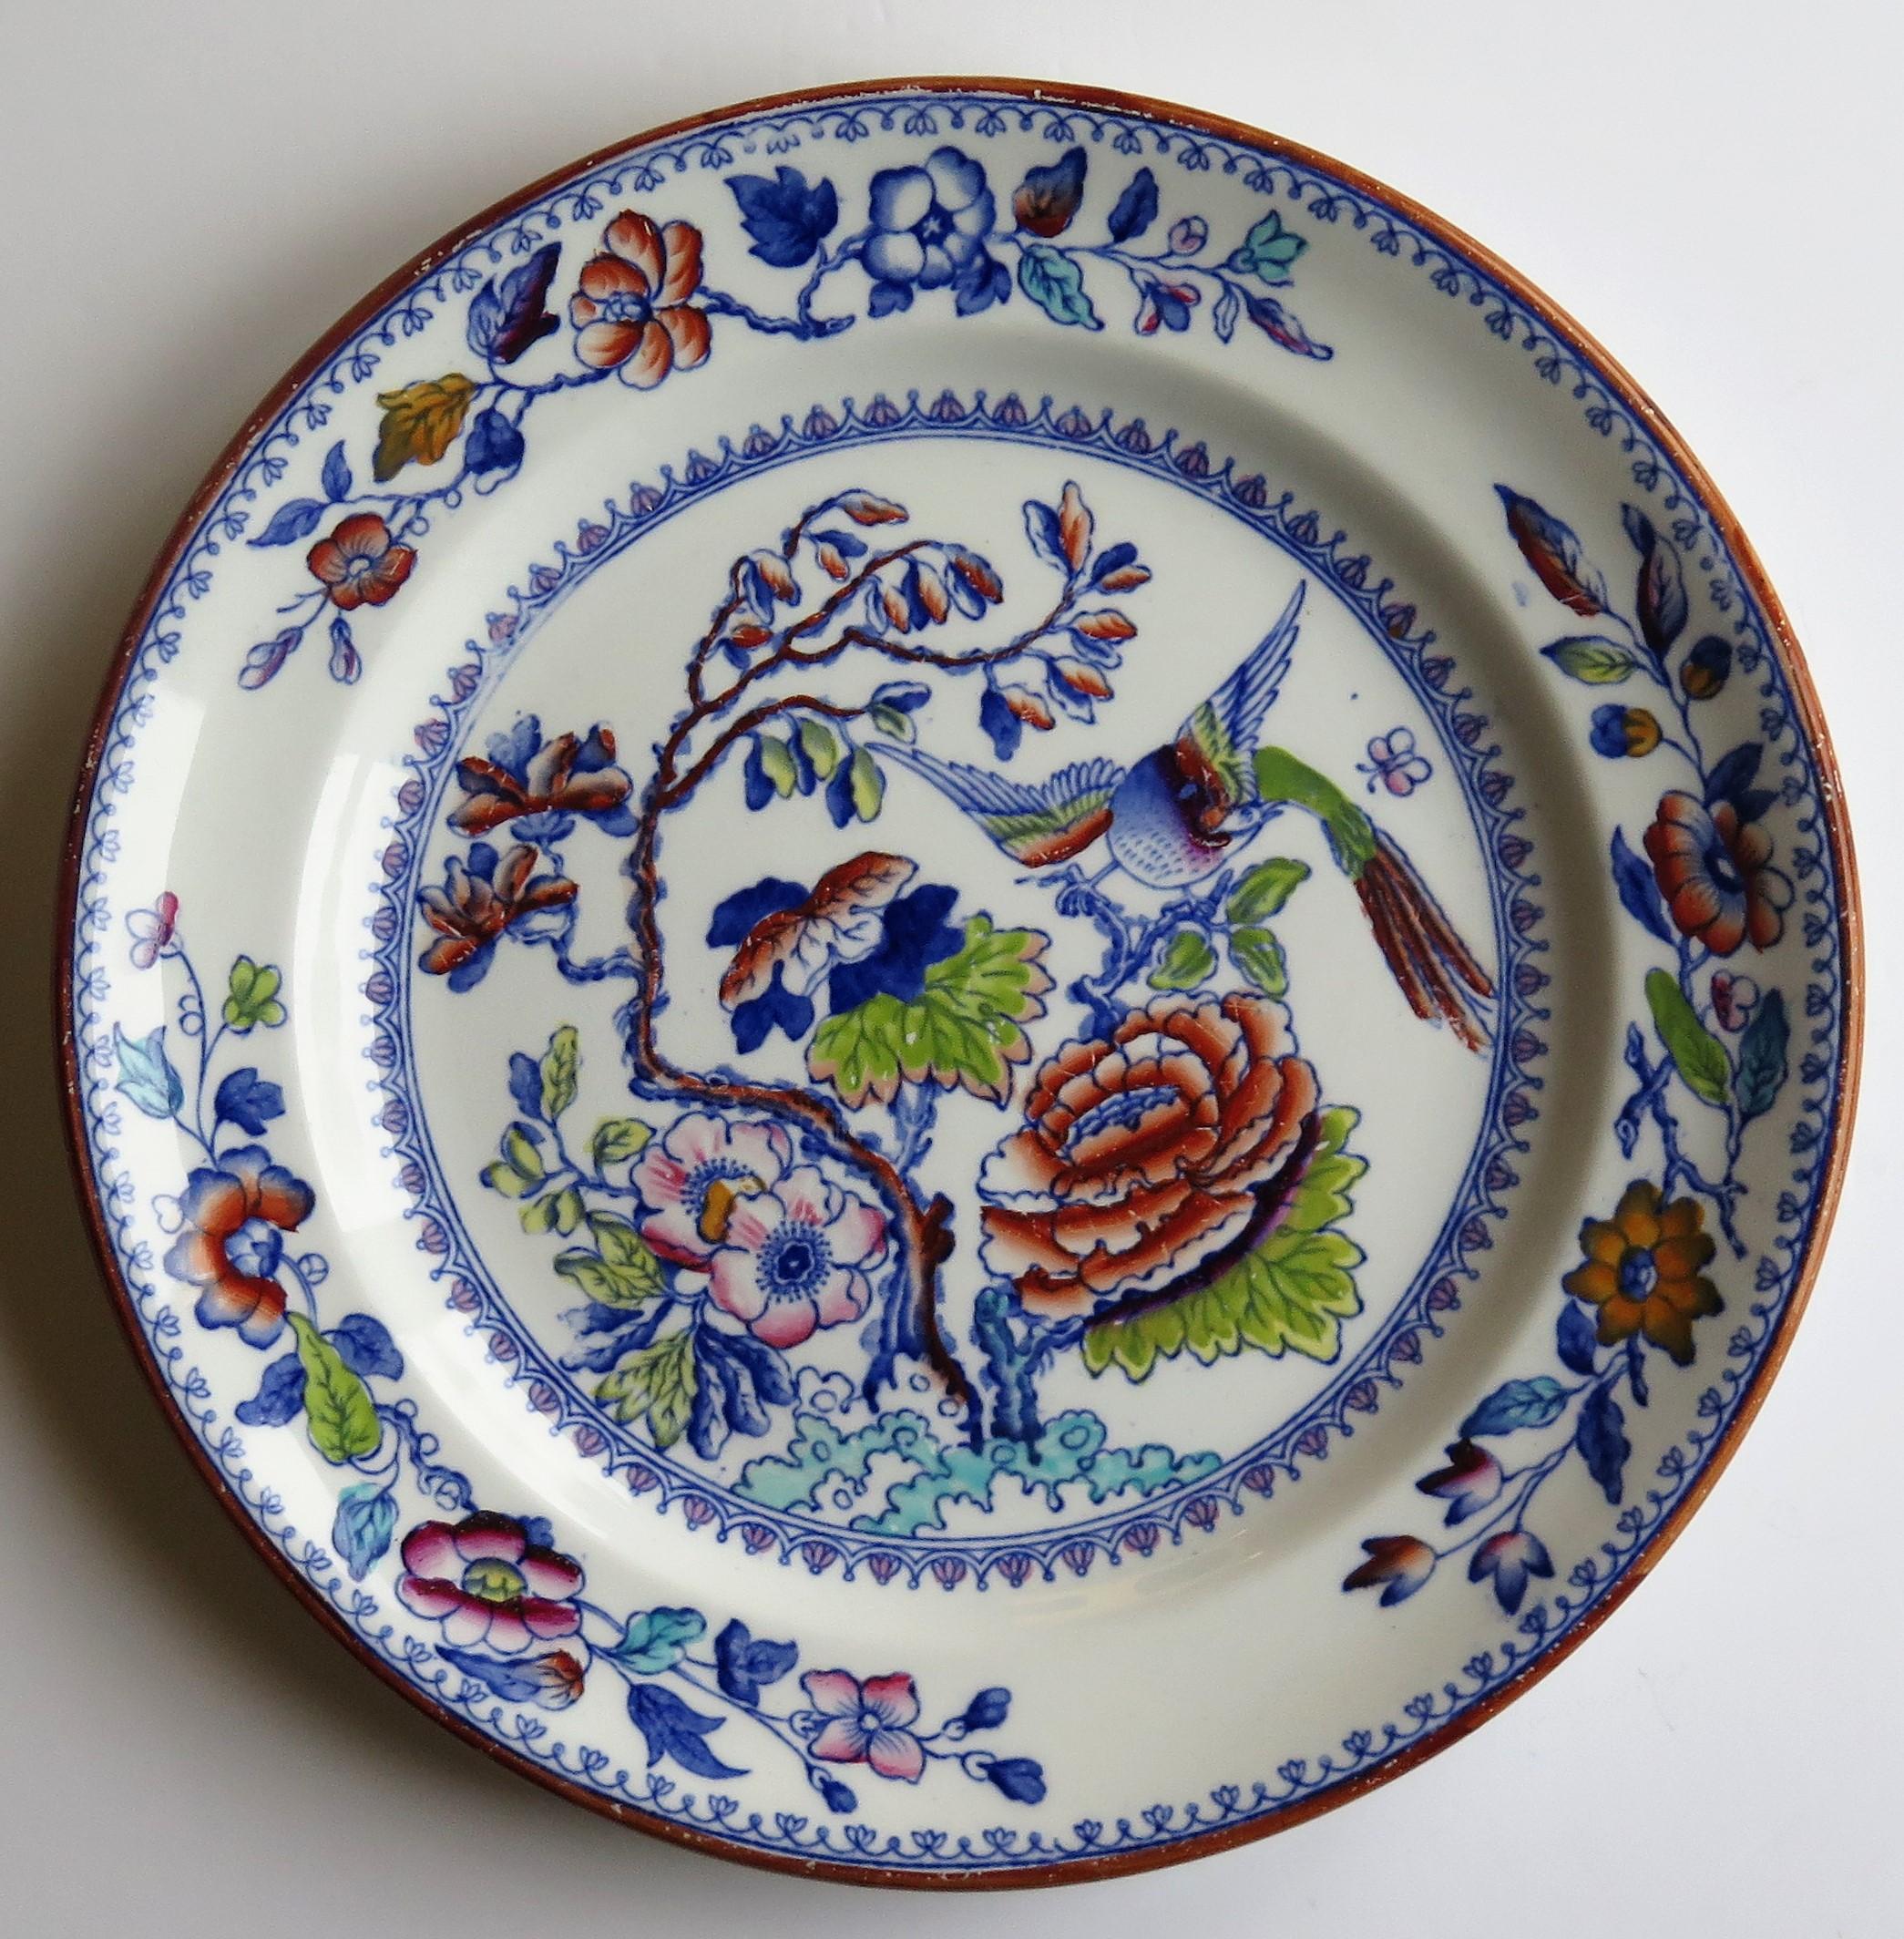 20th Century Mason's Ashworth's Ironstone Large Dinner Plate in Flying Bird Pattern, Ca 1900 For Sale